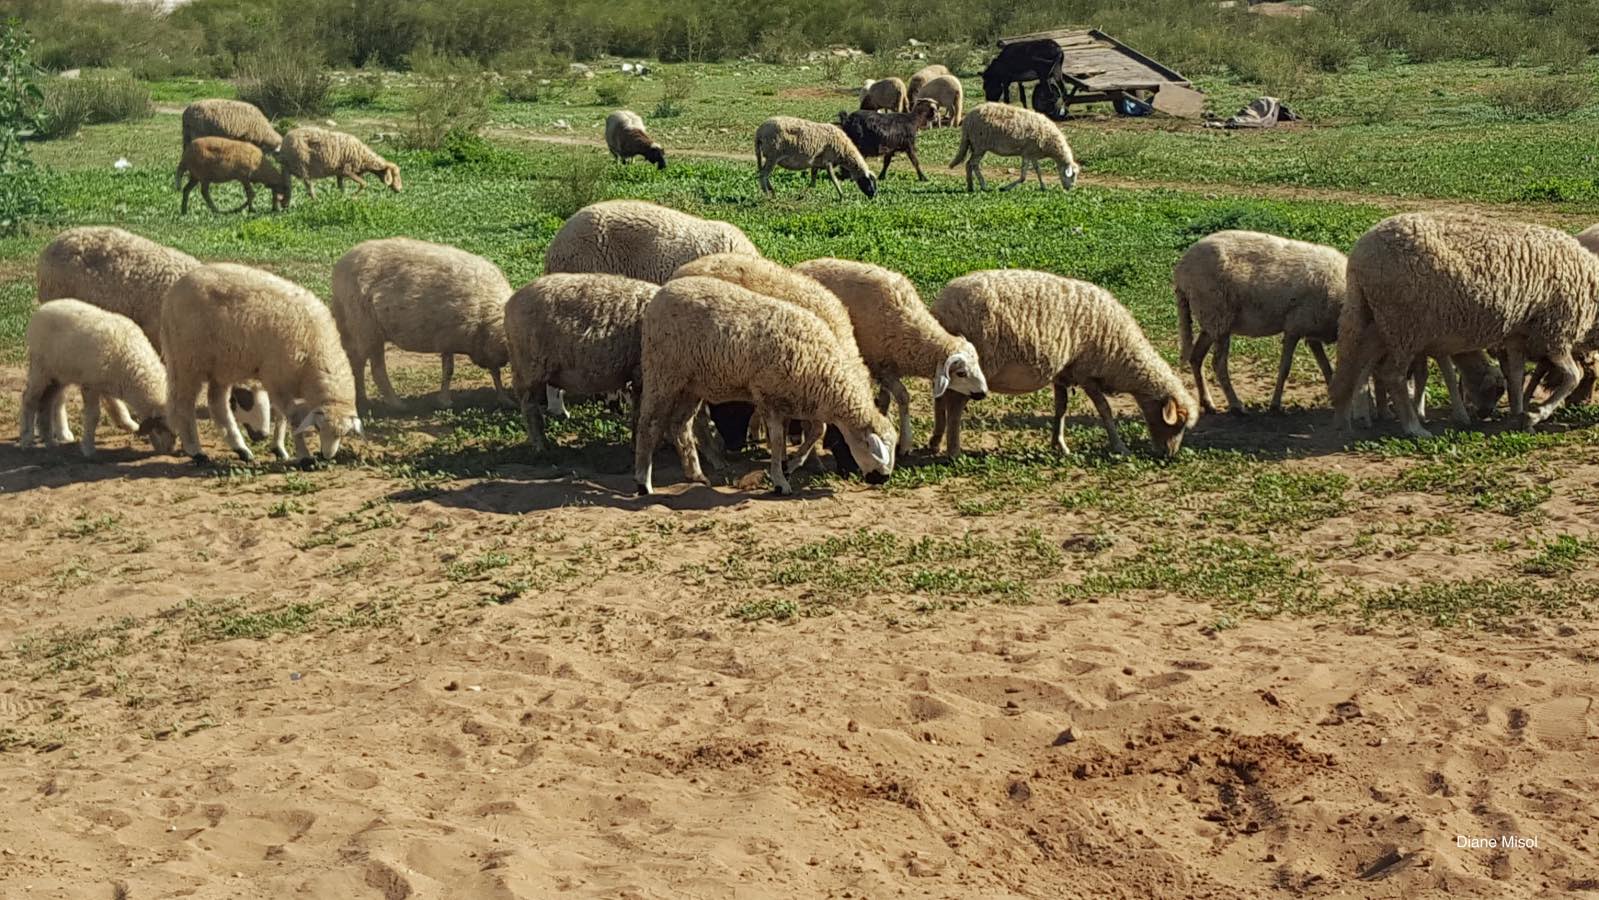 Sheep grazing in the Moroccon Countryside